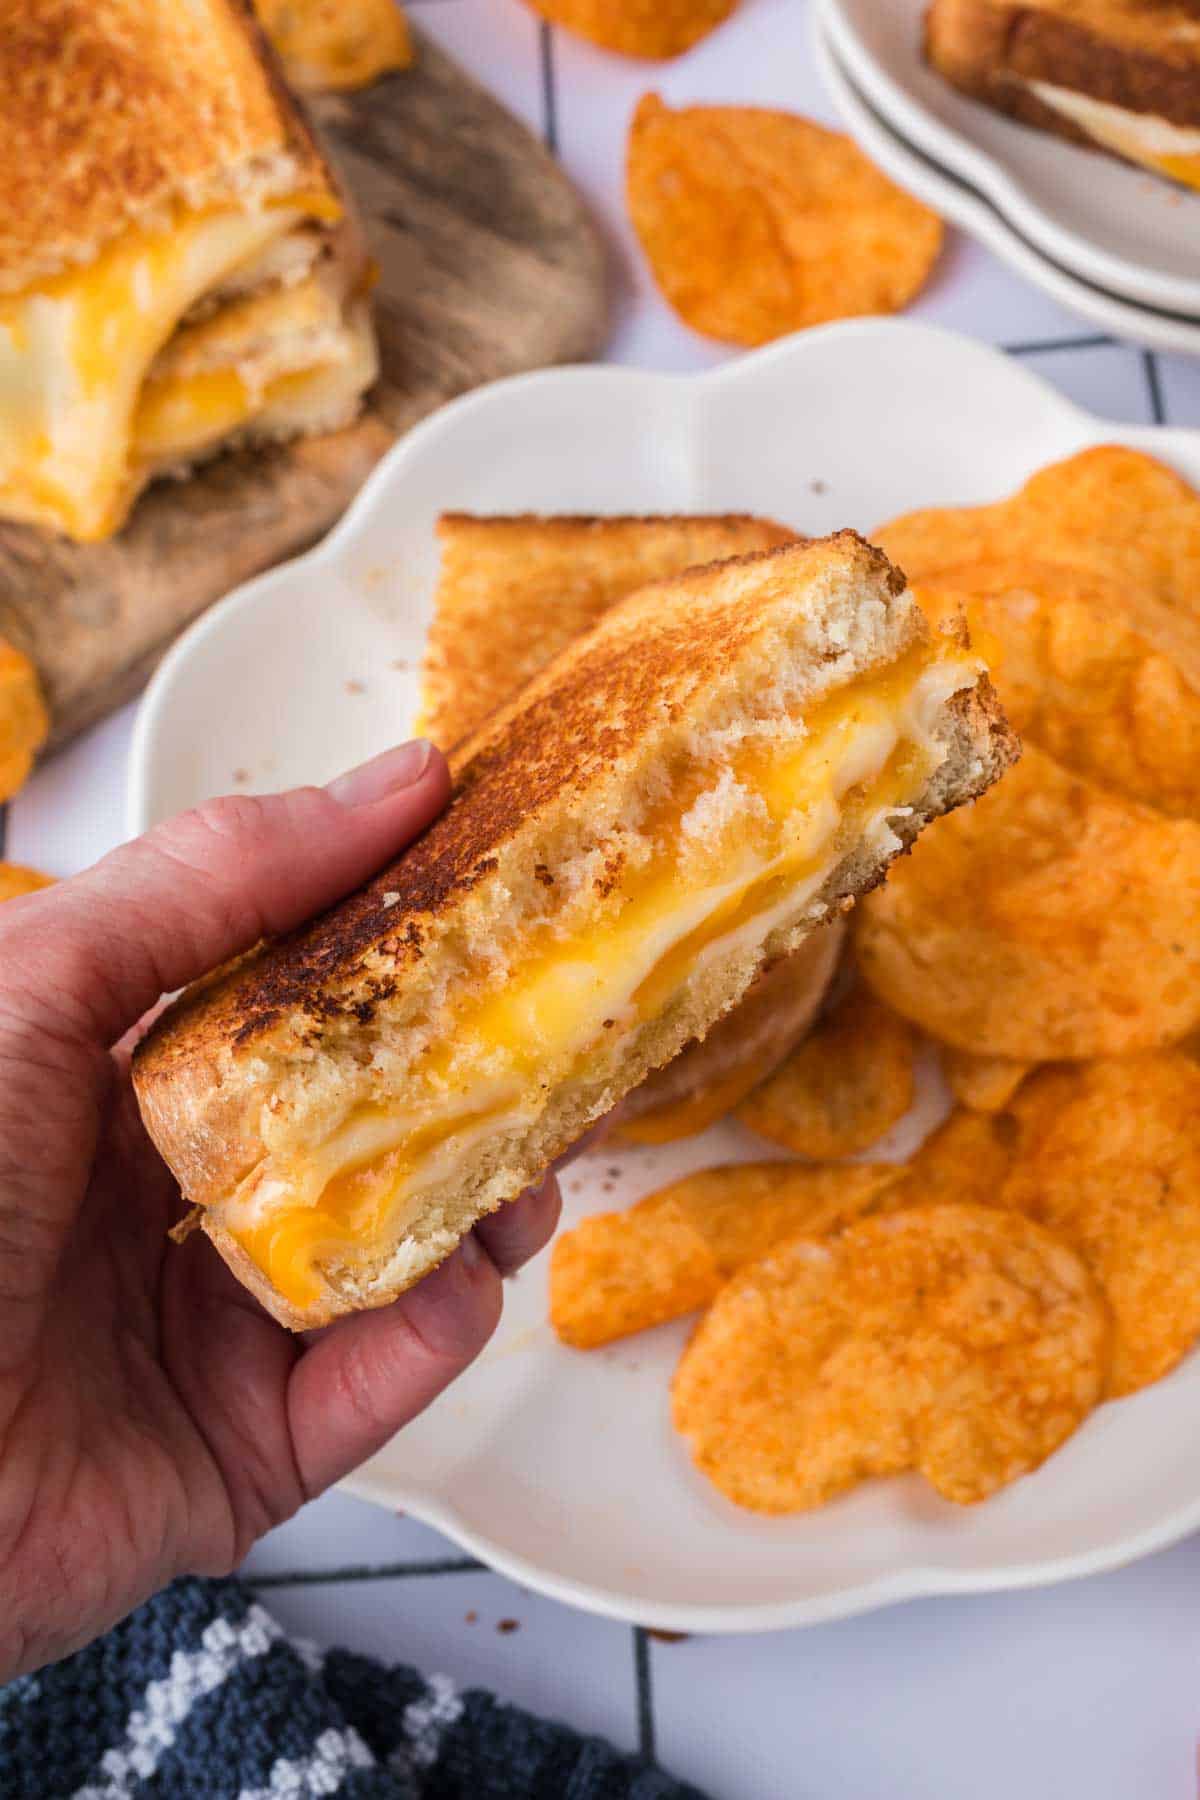 Close up image of half of grilled cheese being held with a plate of chips in the background